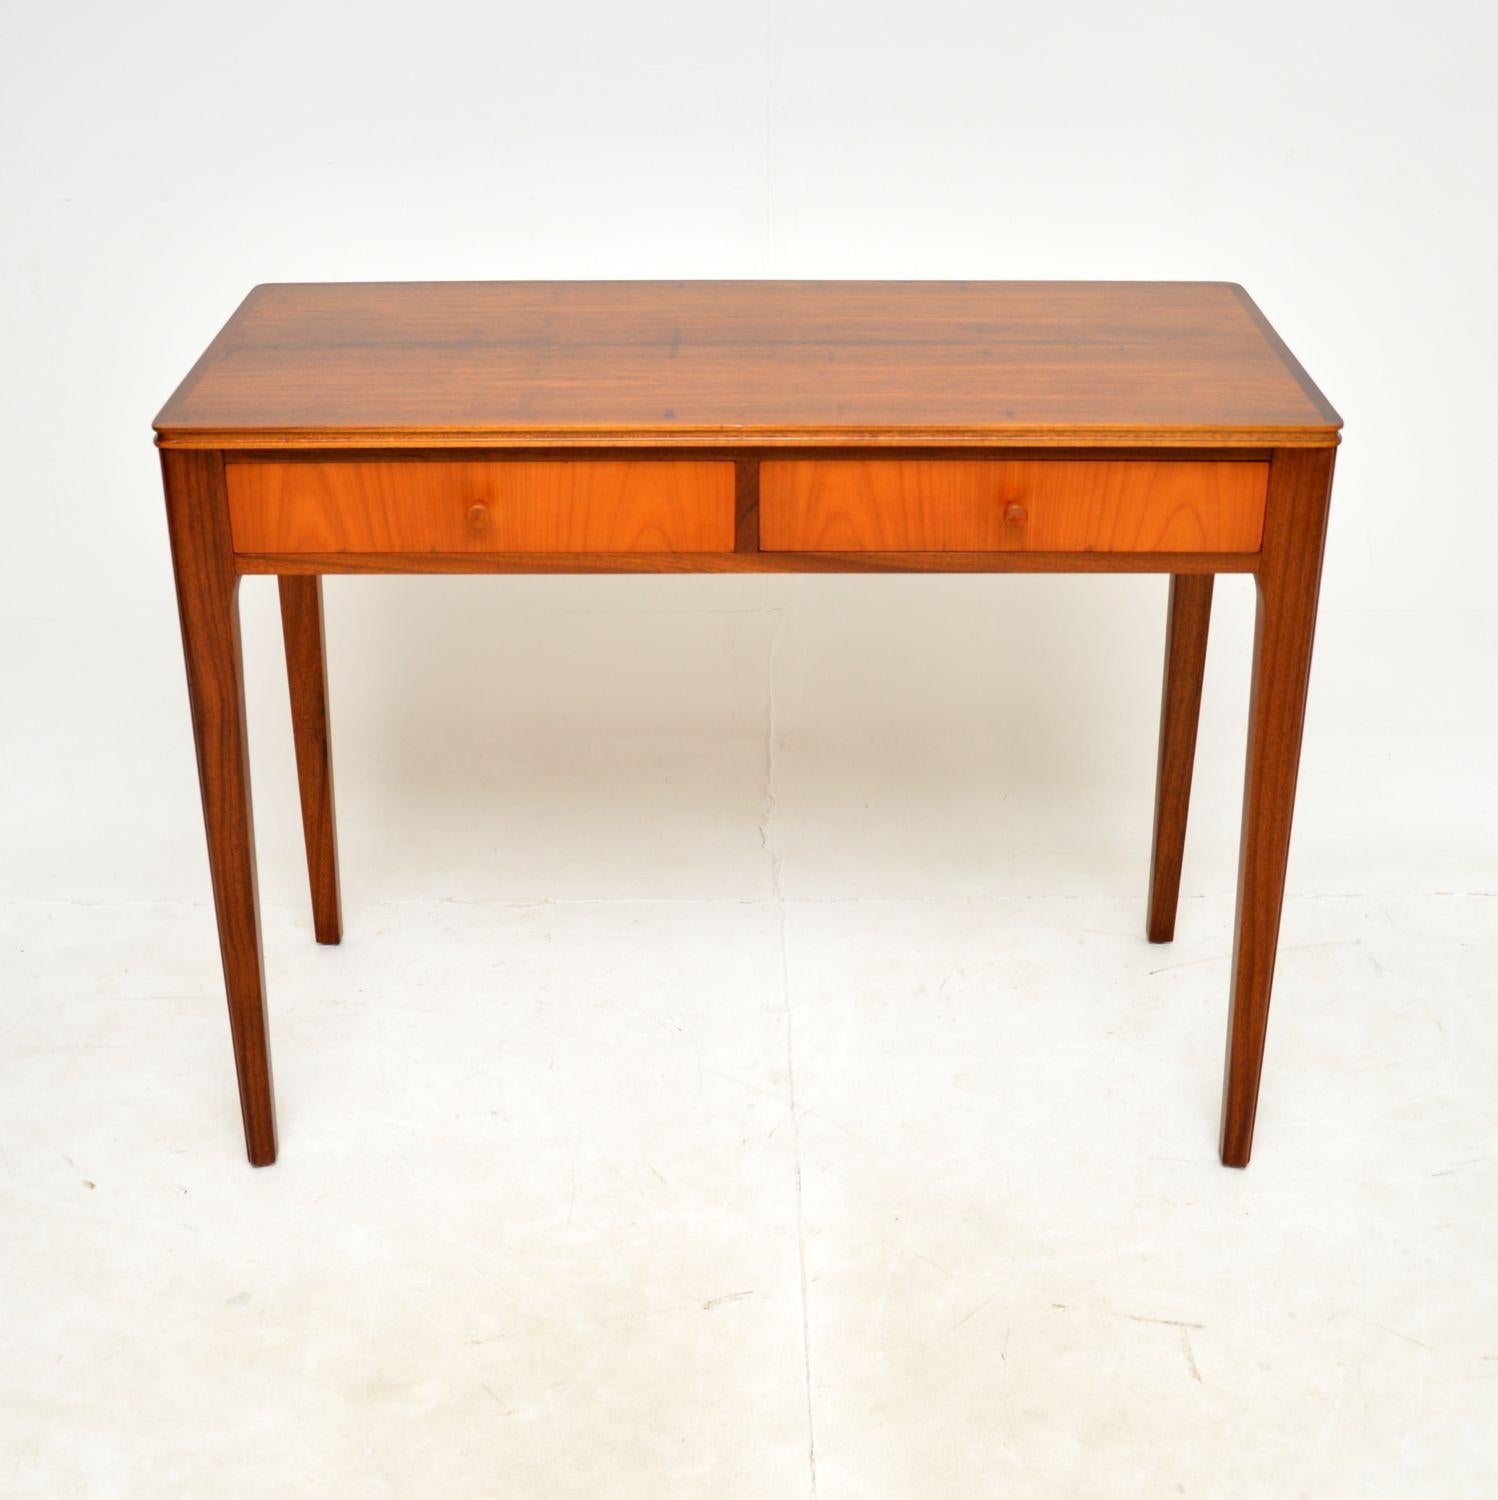 A very stylish and well made vintage console table / desk. This was designed and made by Storys of Kensington, it dates from the 1960’s.

It is a very useful size and is of super quality. It would make a perfect entry way table and is equally